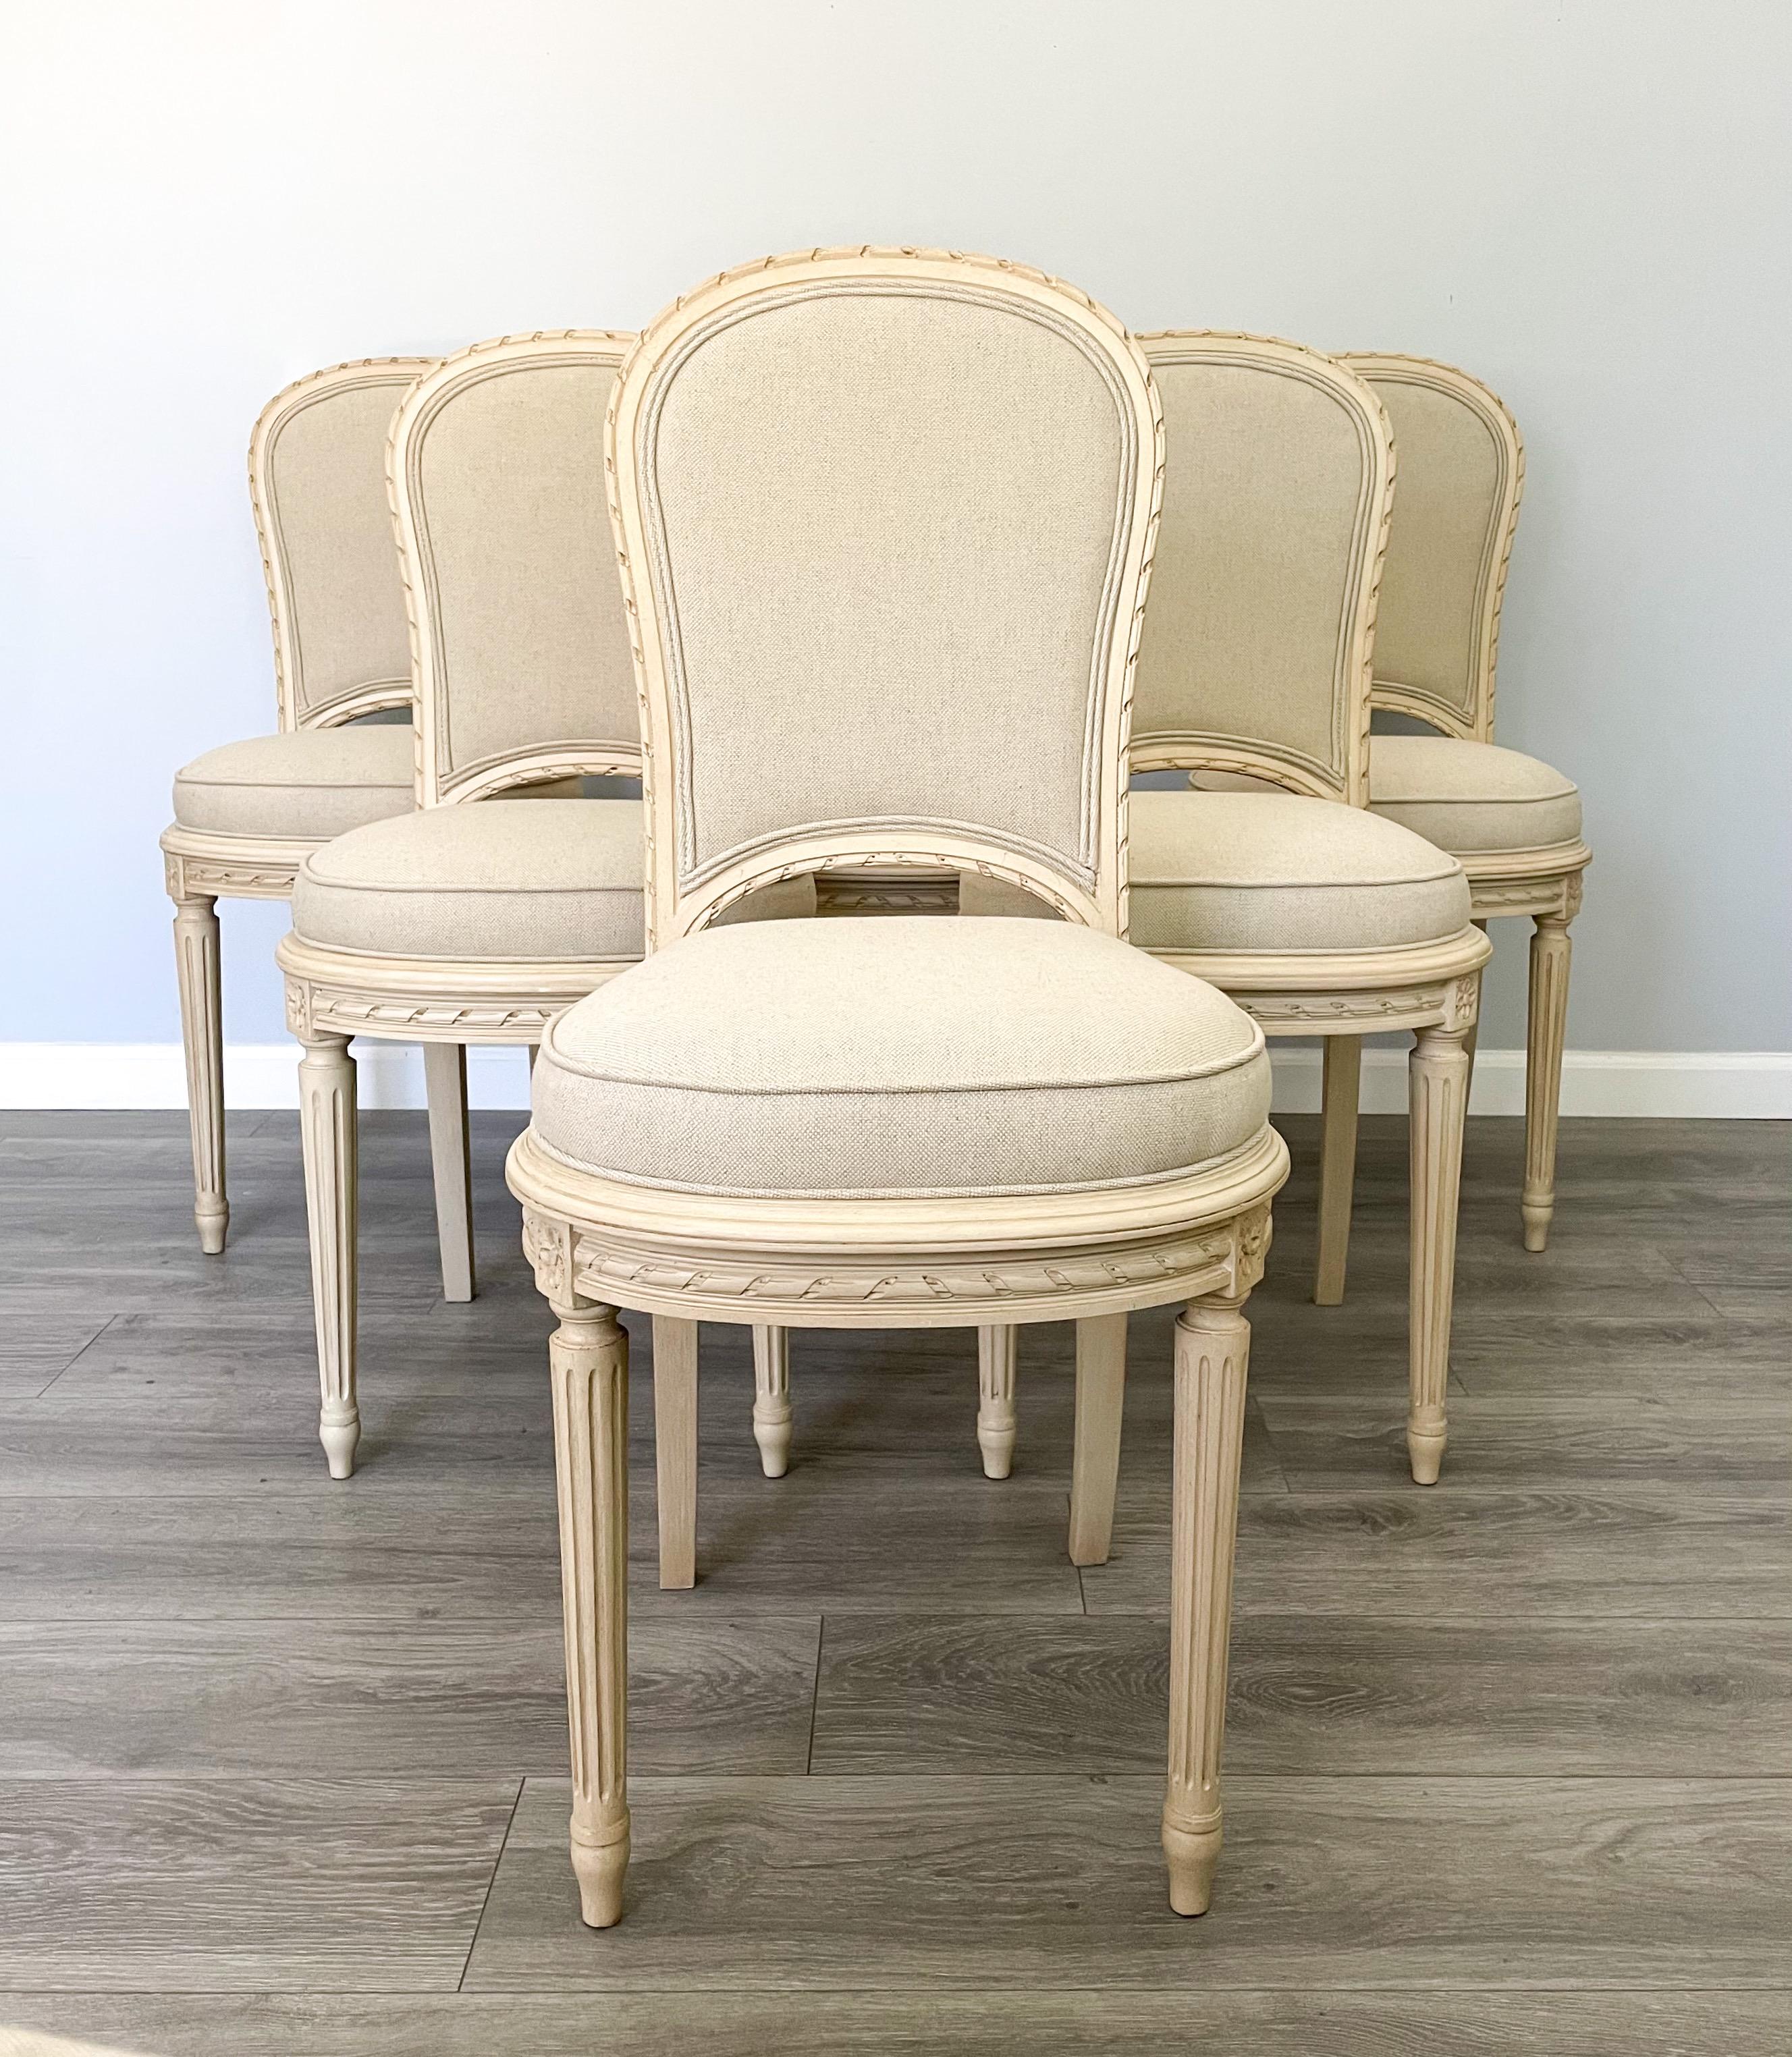 Beautiful, set of 6 French 1920s dining chairs by Laurenceau, Paris. 

Each chair consists of a delicately carved wood frame styled in the Louis XVI style. 

The chairs have been newly painted in a vintage crème color with a hand-applied antique